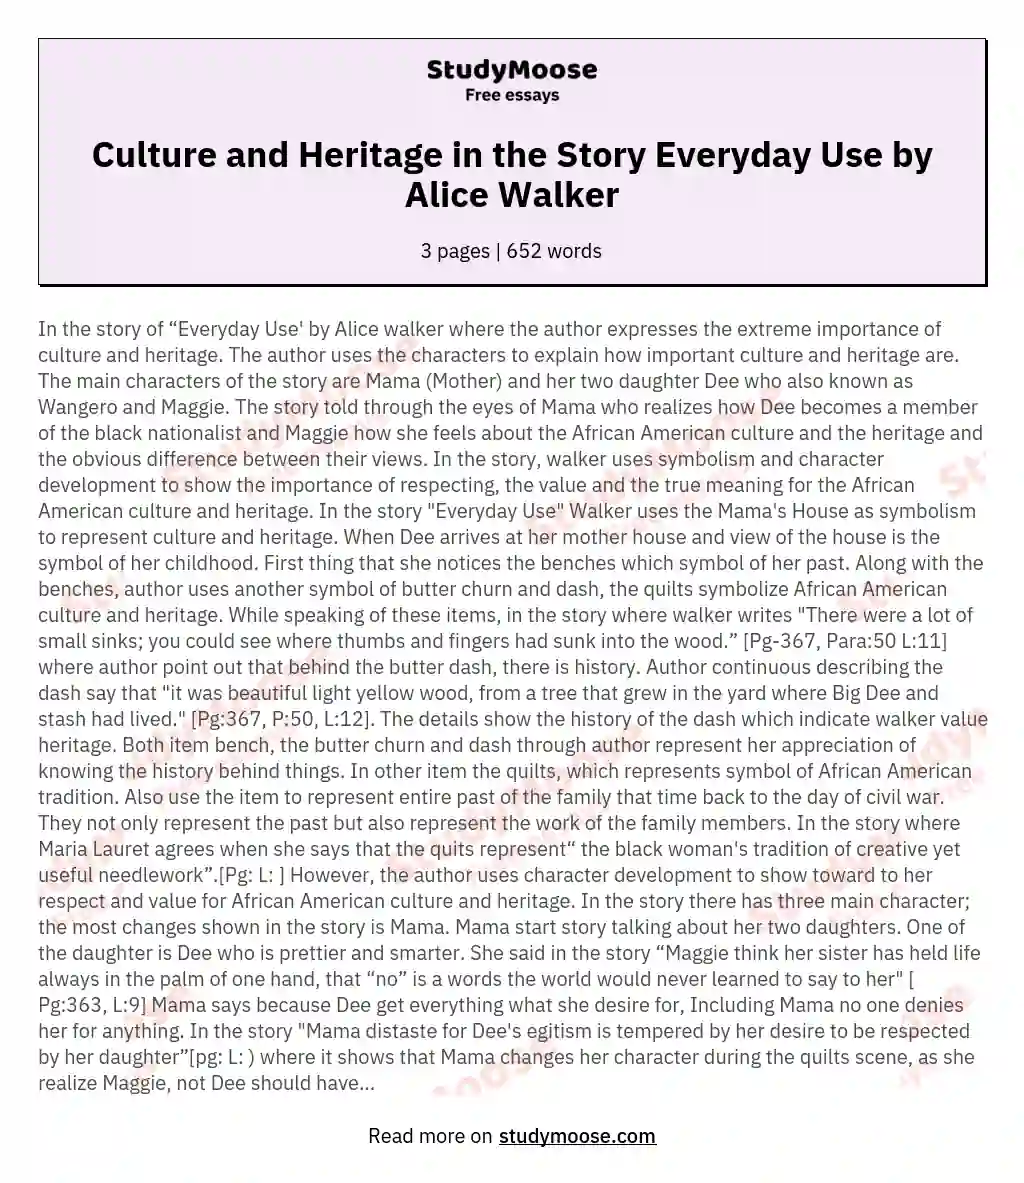 Culture and Heritage in the Story Everyday Use by Alice Walker essay